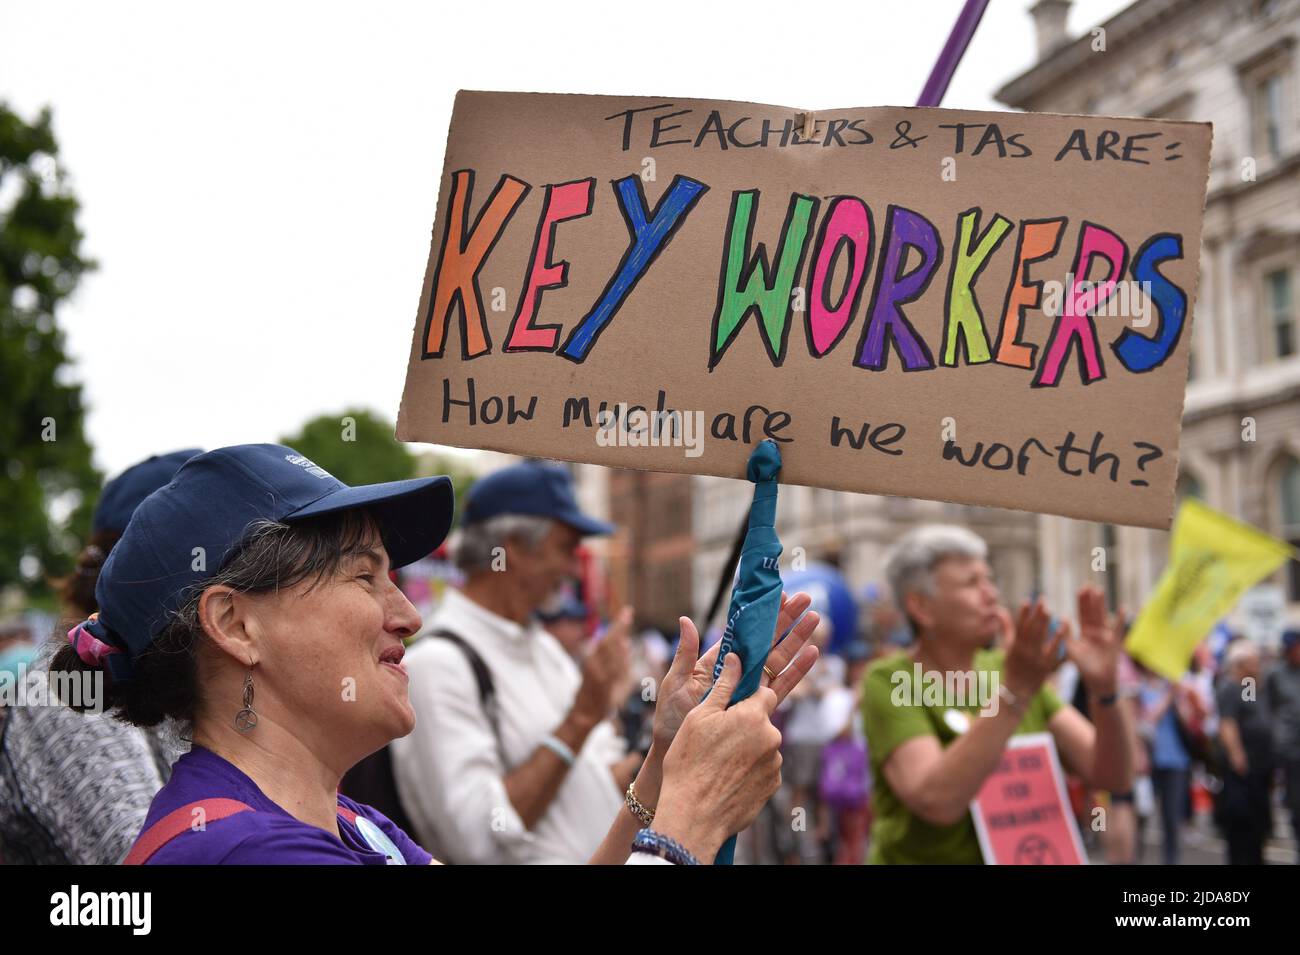 Thousands of protesters marched through central London in TUC (Trades Union Congress) organised rally, in demand of action on the costs of living and higher wages. Stock Photo